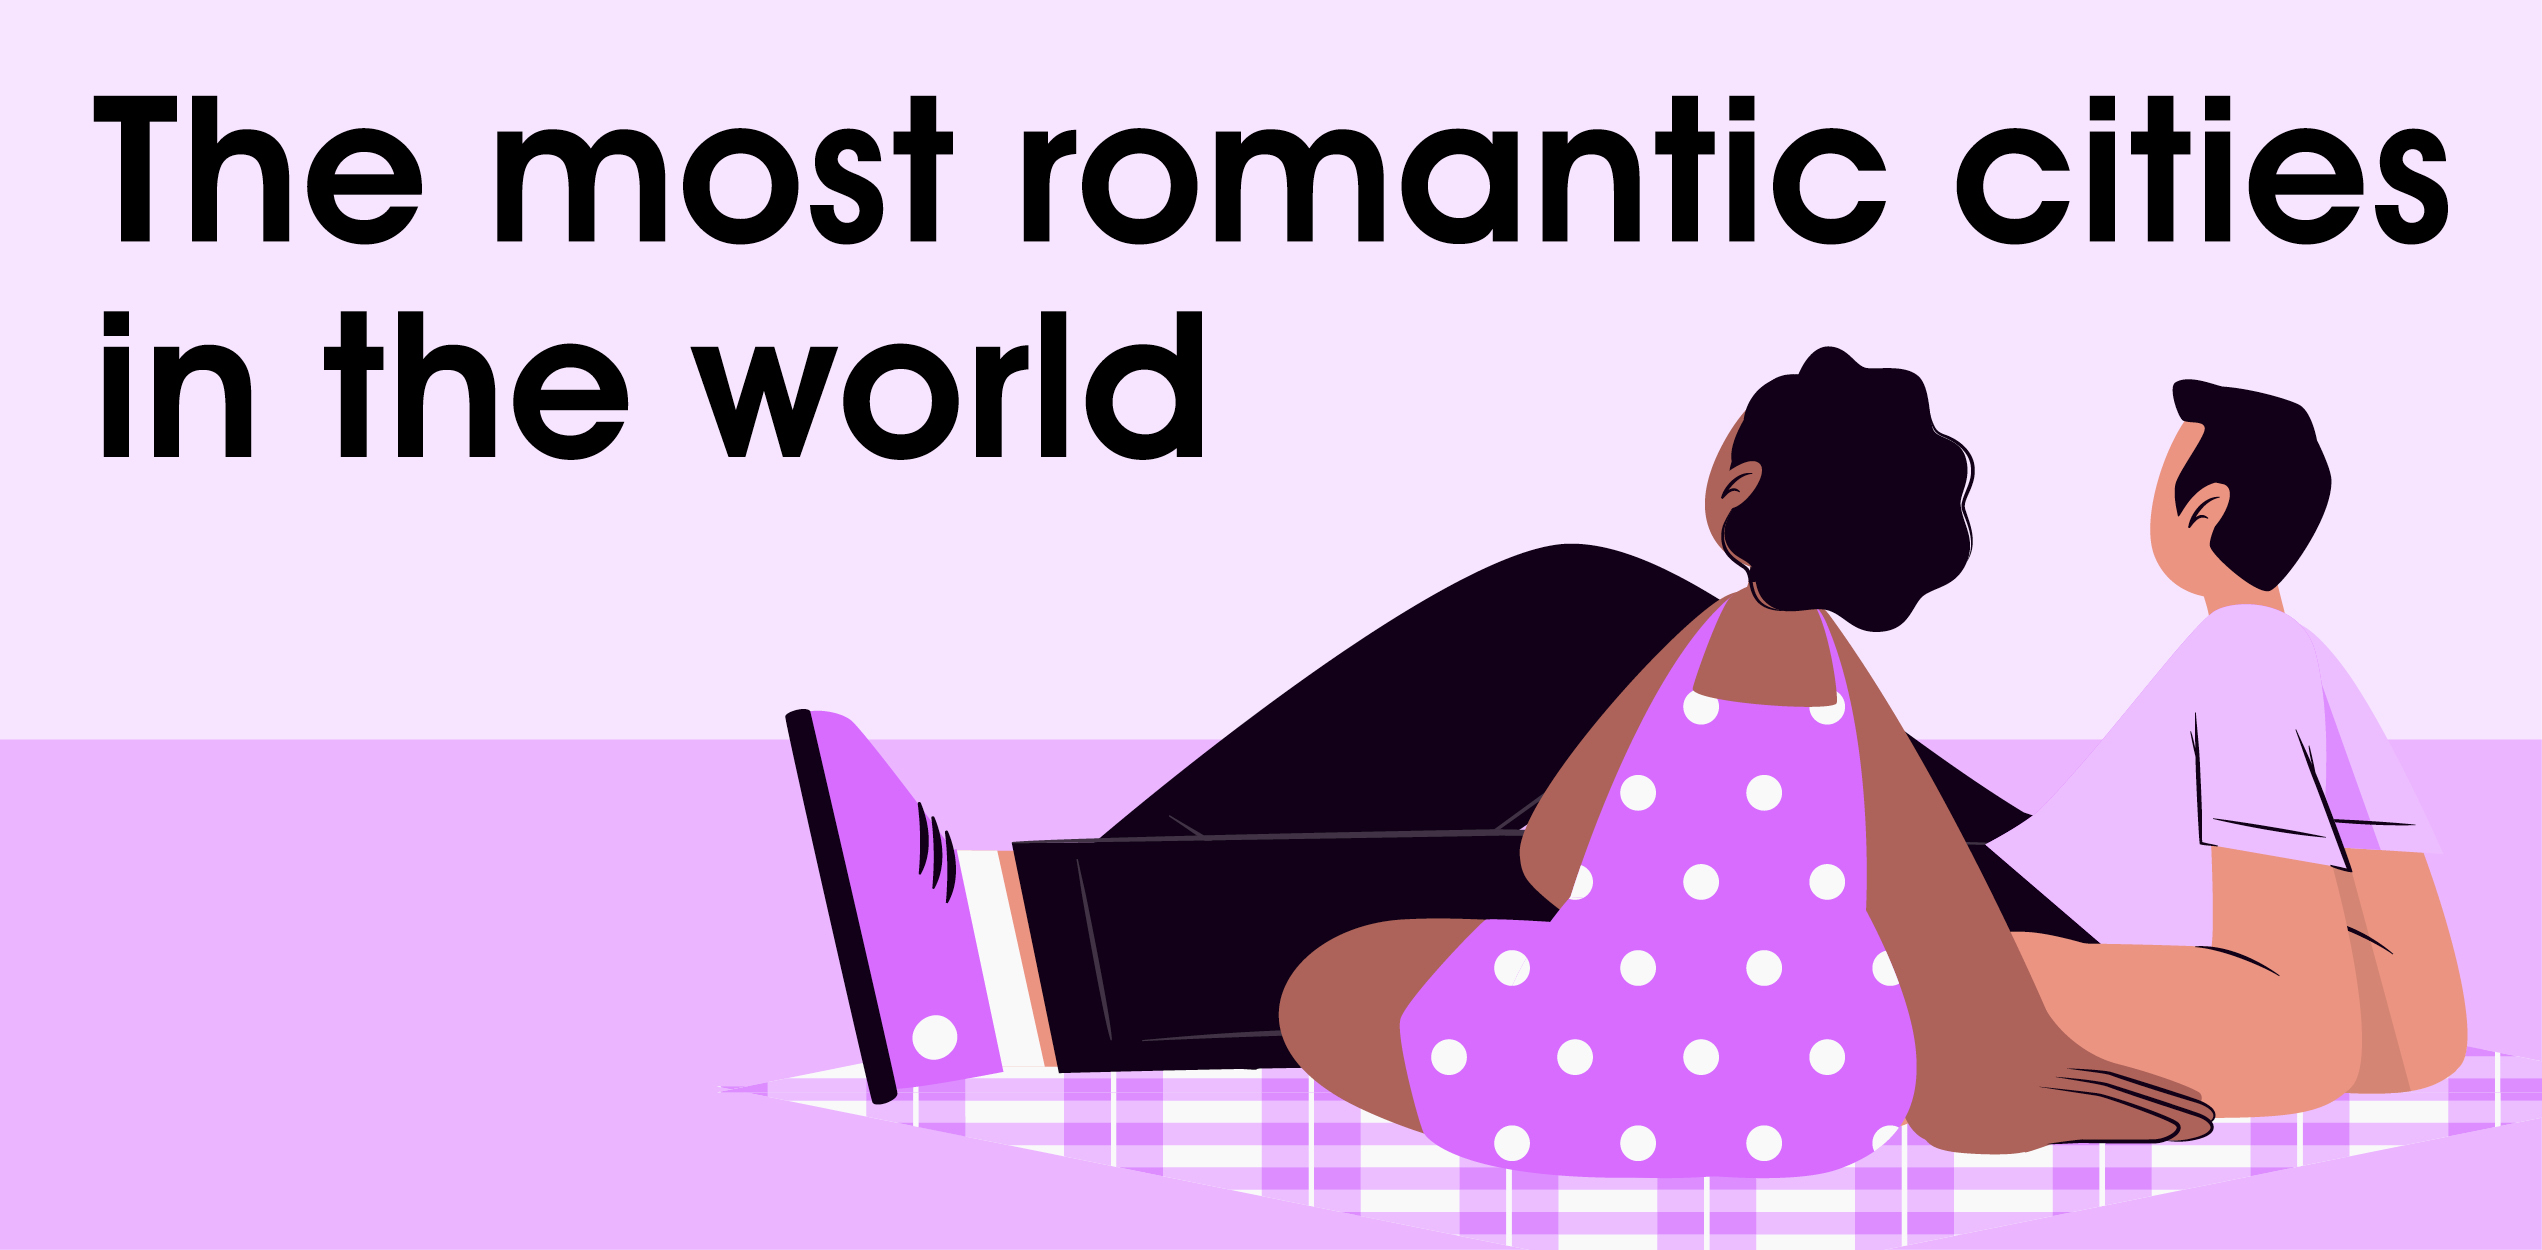 The romantic cities in the world